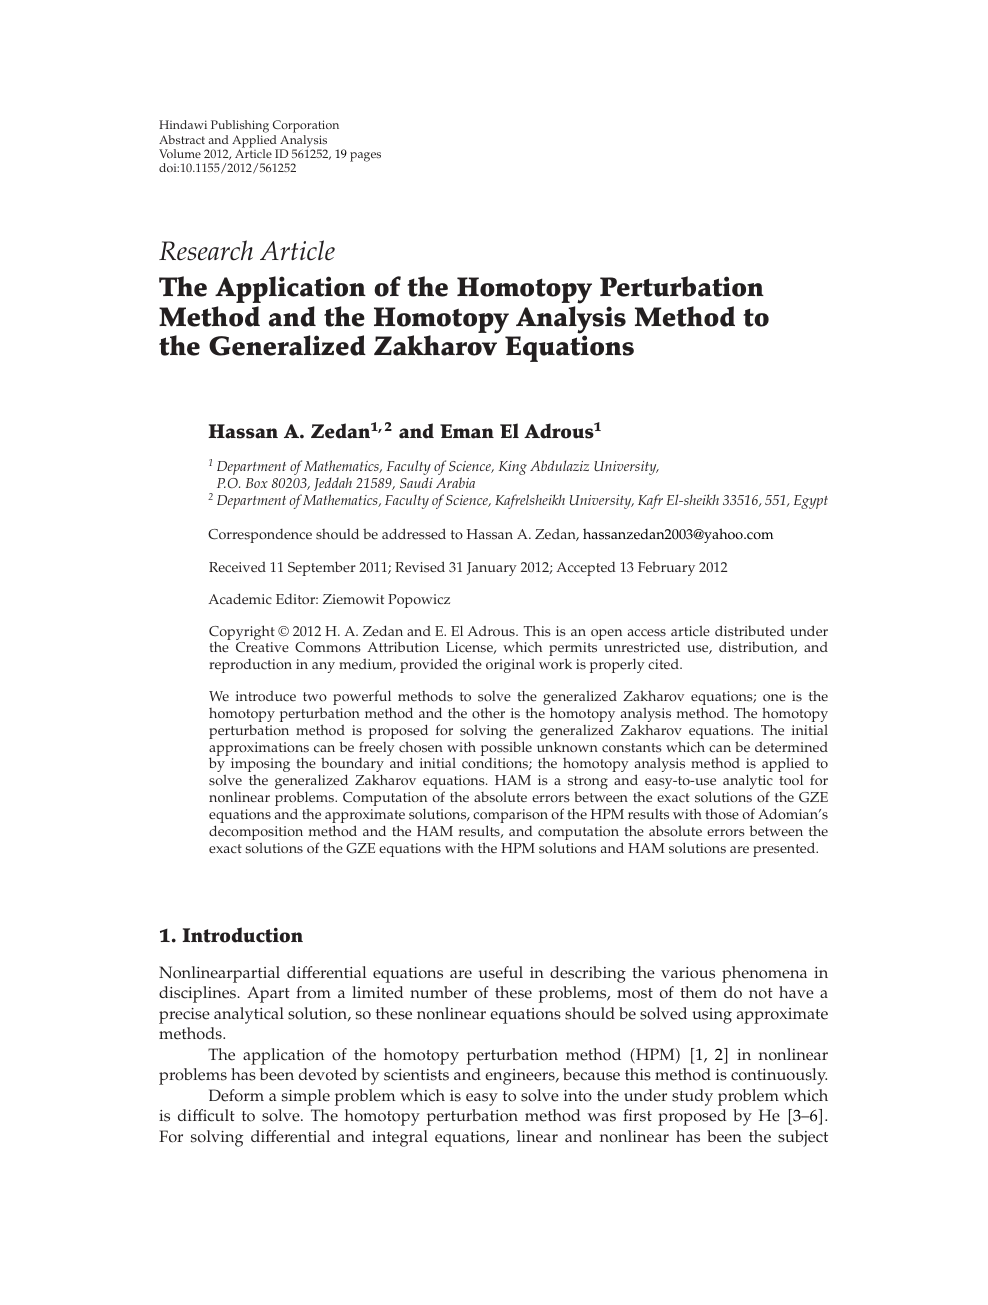 The Application Of The Homotopy Perturbation Method And The Homotopy Analysis Method To The Generalized Zakharov Equations Topic Of Research Paper In Mathematics Download Scholarly Article Pdf And Read For Free